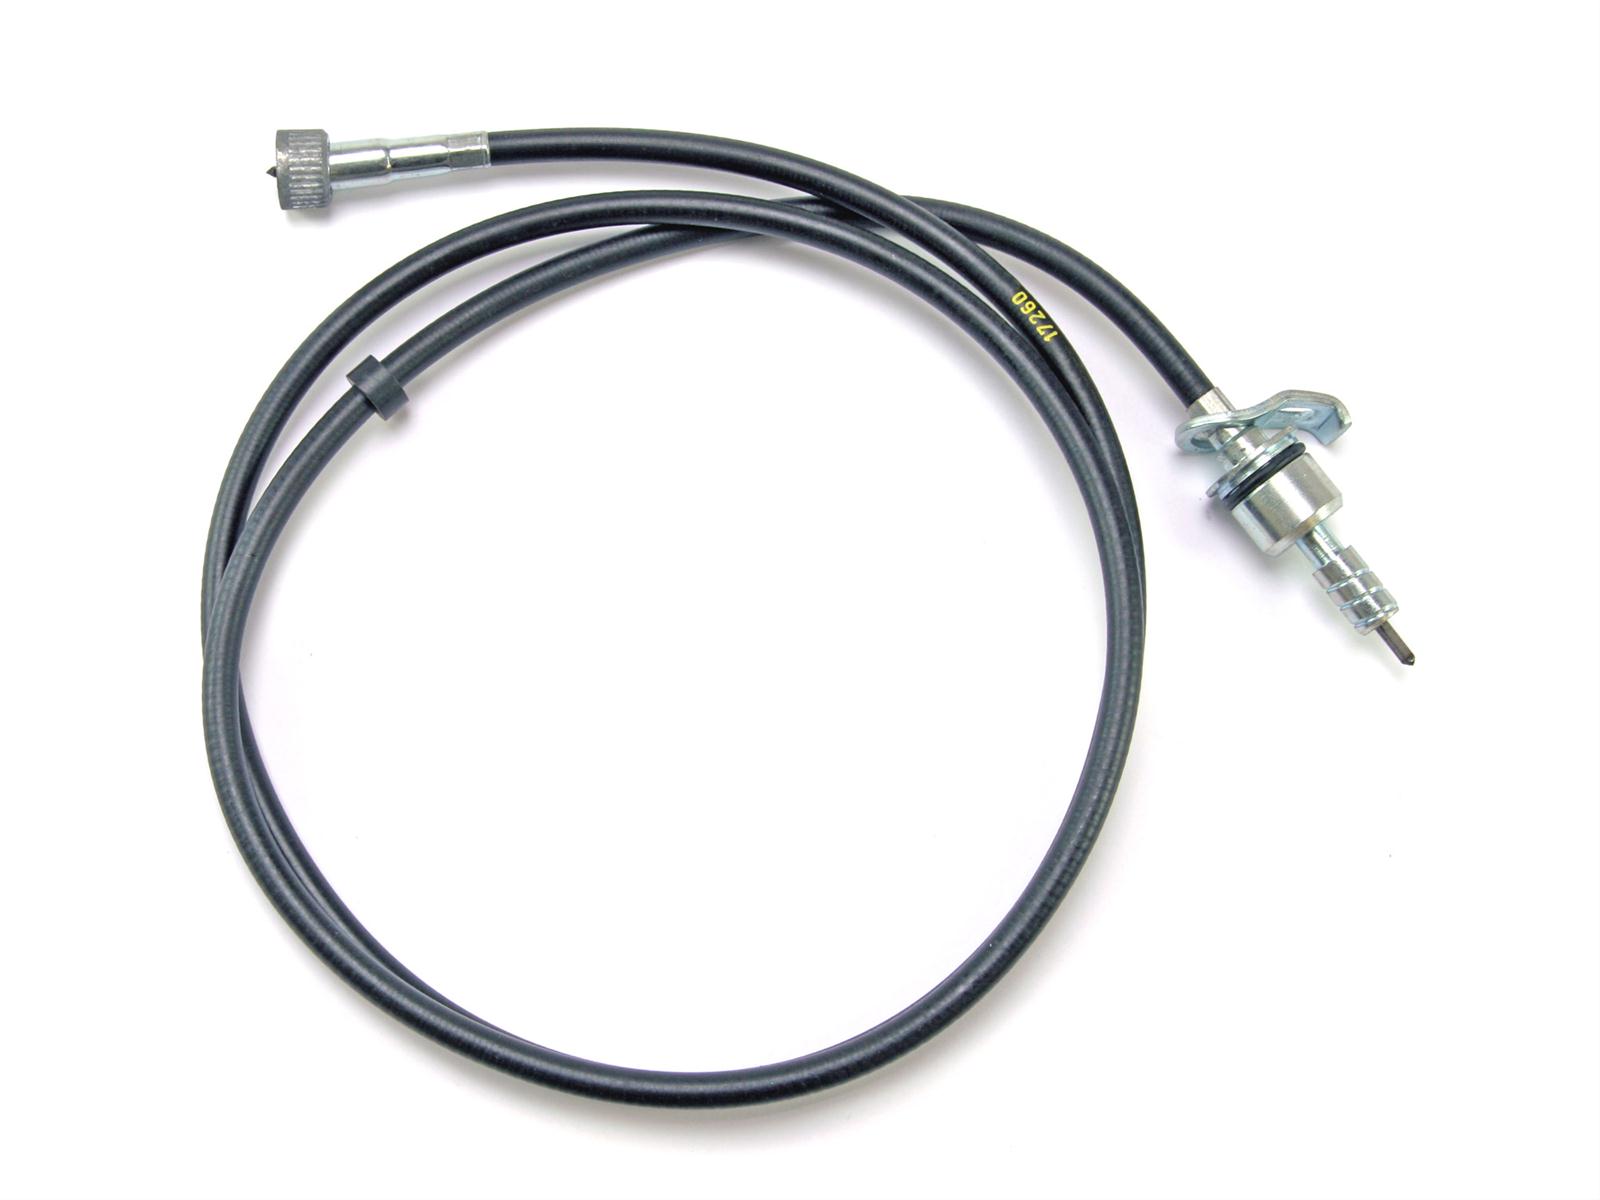 Details about   RALLY 3484 FORD CABLE ADAPTOR 1985-89 